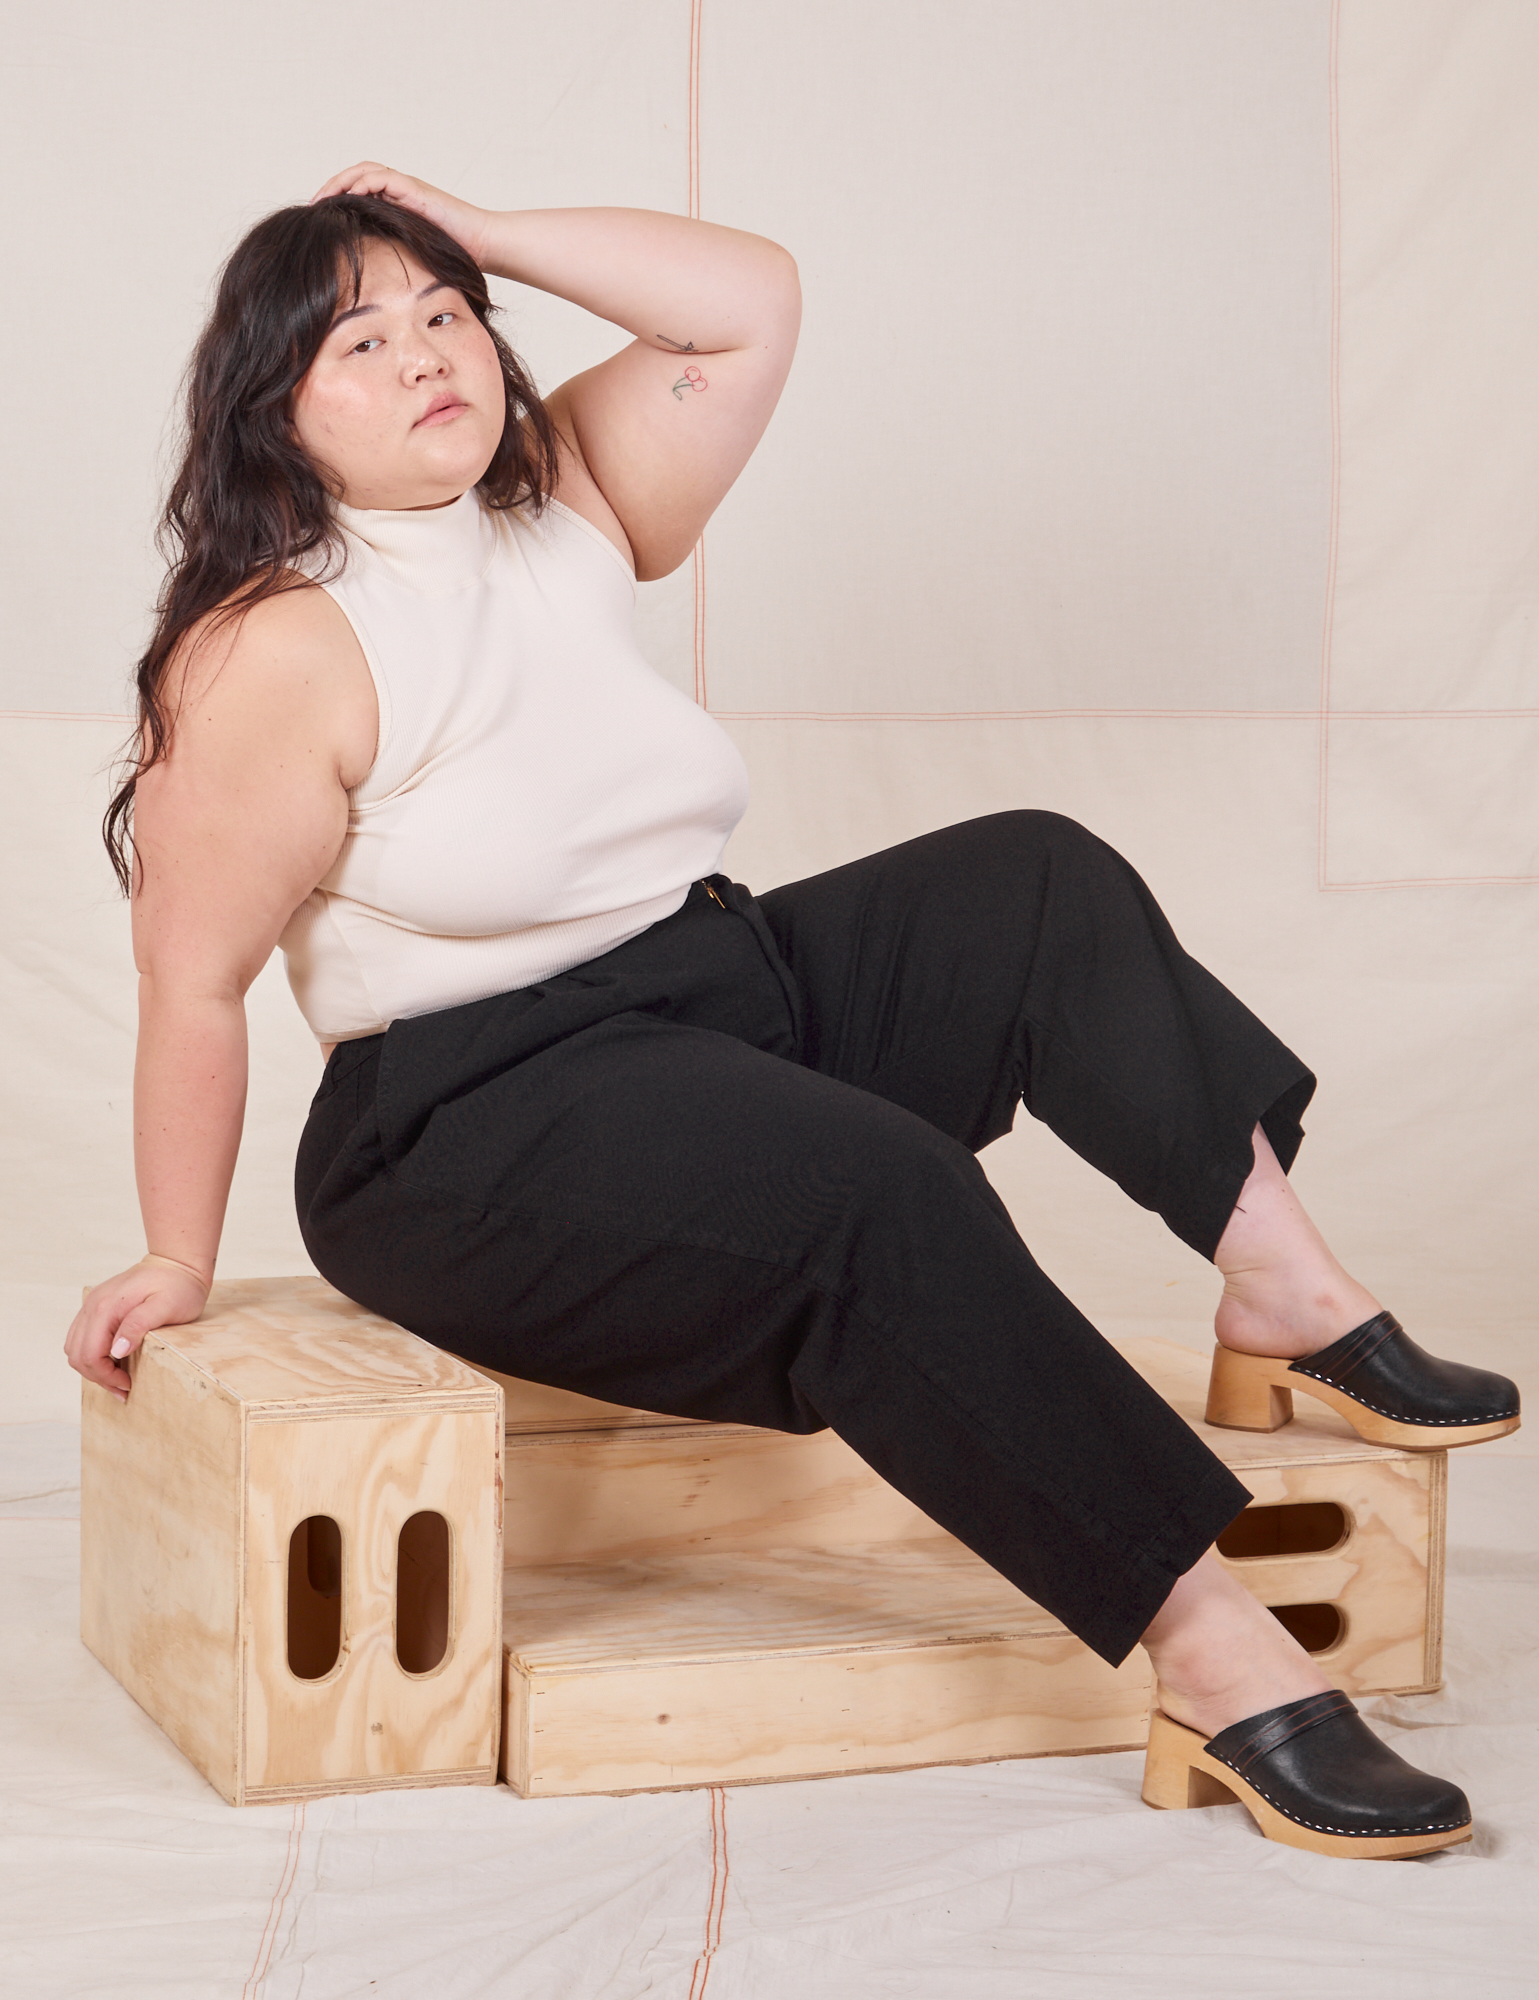 Ashley is wearing Heavyweight Trousers in Basic Black and Sleeveless Turtleneck in vintage tee off-white. She is sitting on a wooden crate.